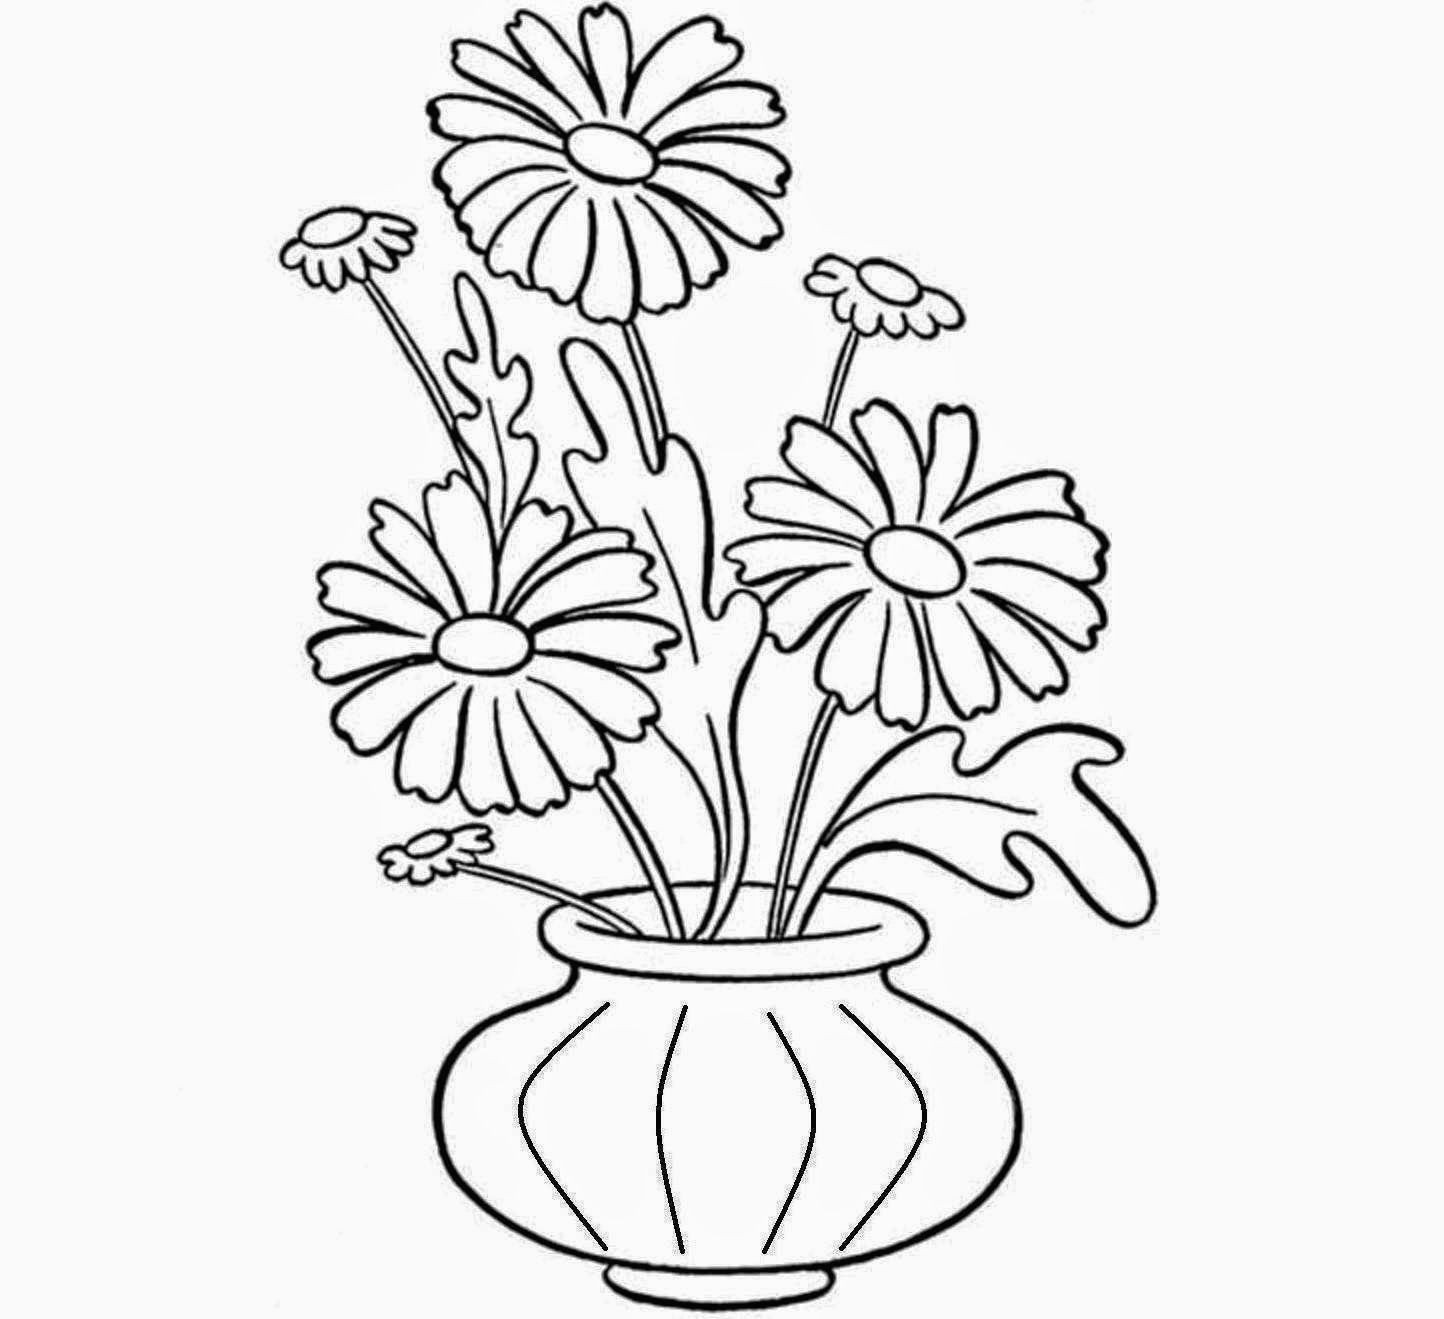 Easy Drawings Of Flower Pot Mind Blowing Tips Vases Vintage Glass Vases Garden Center Pieces